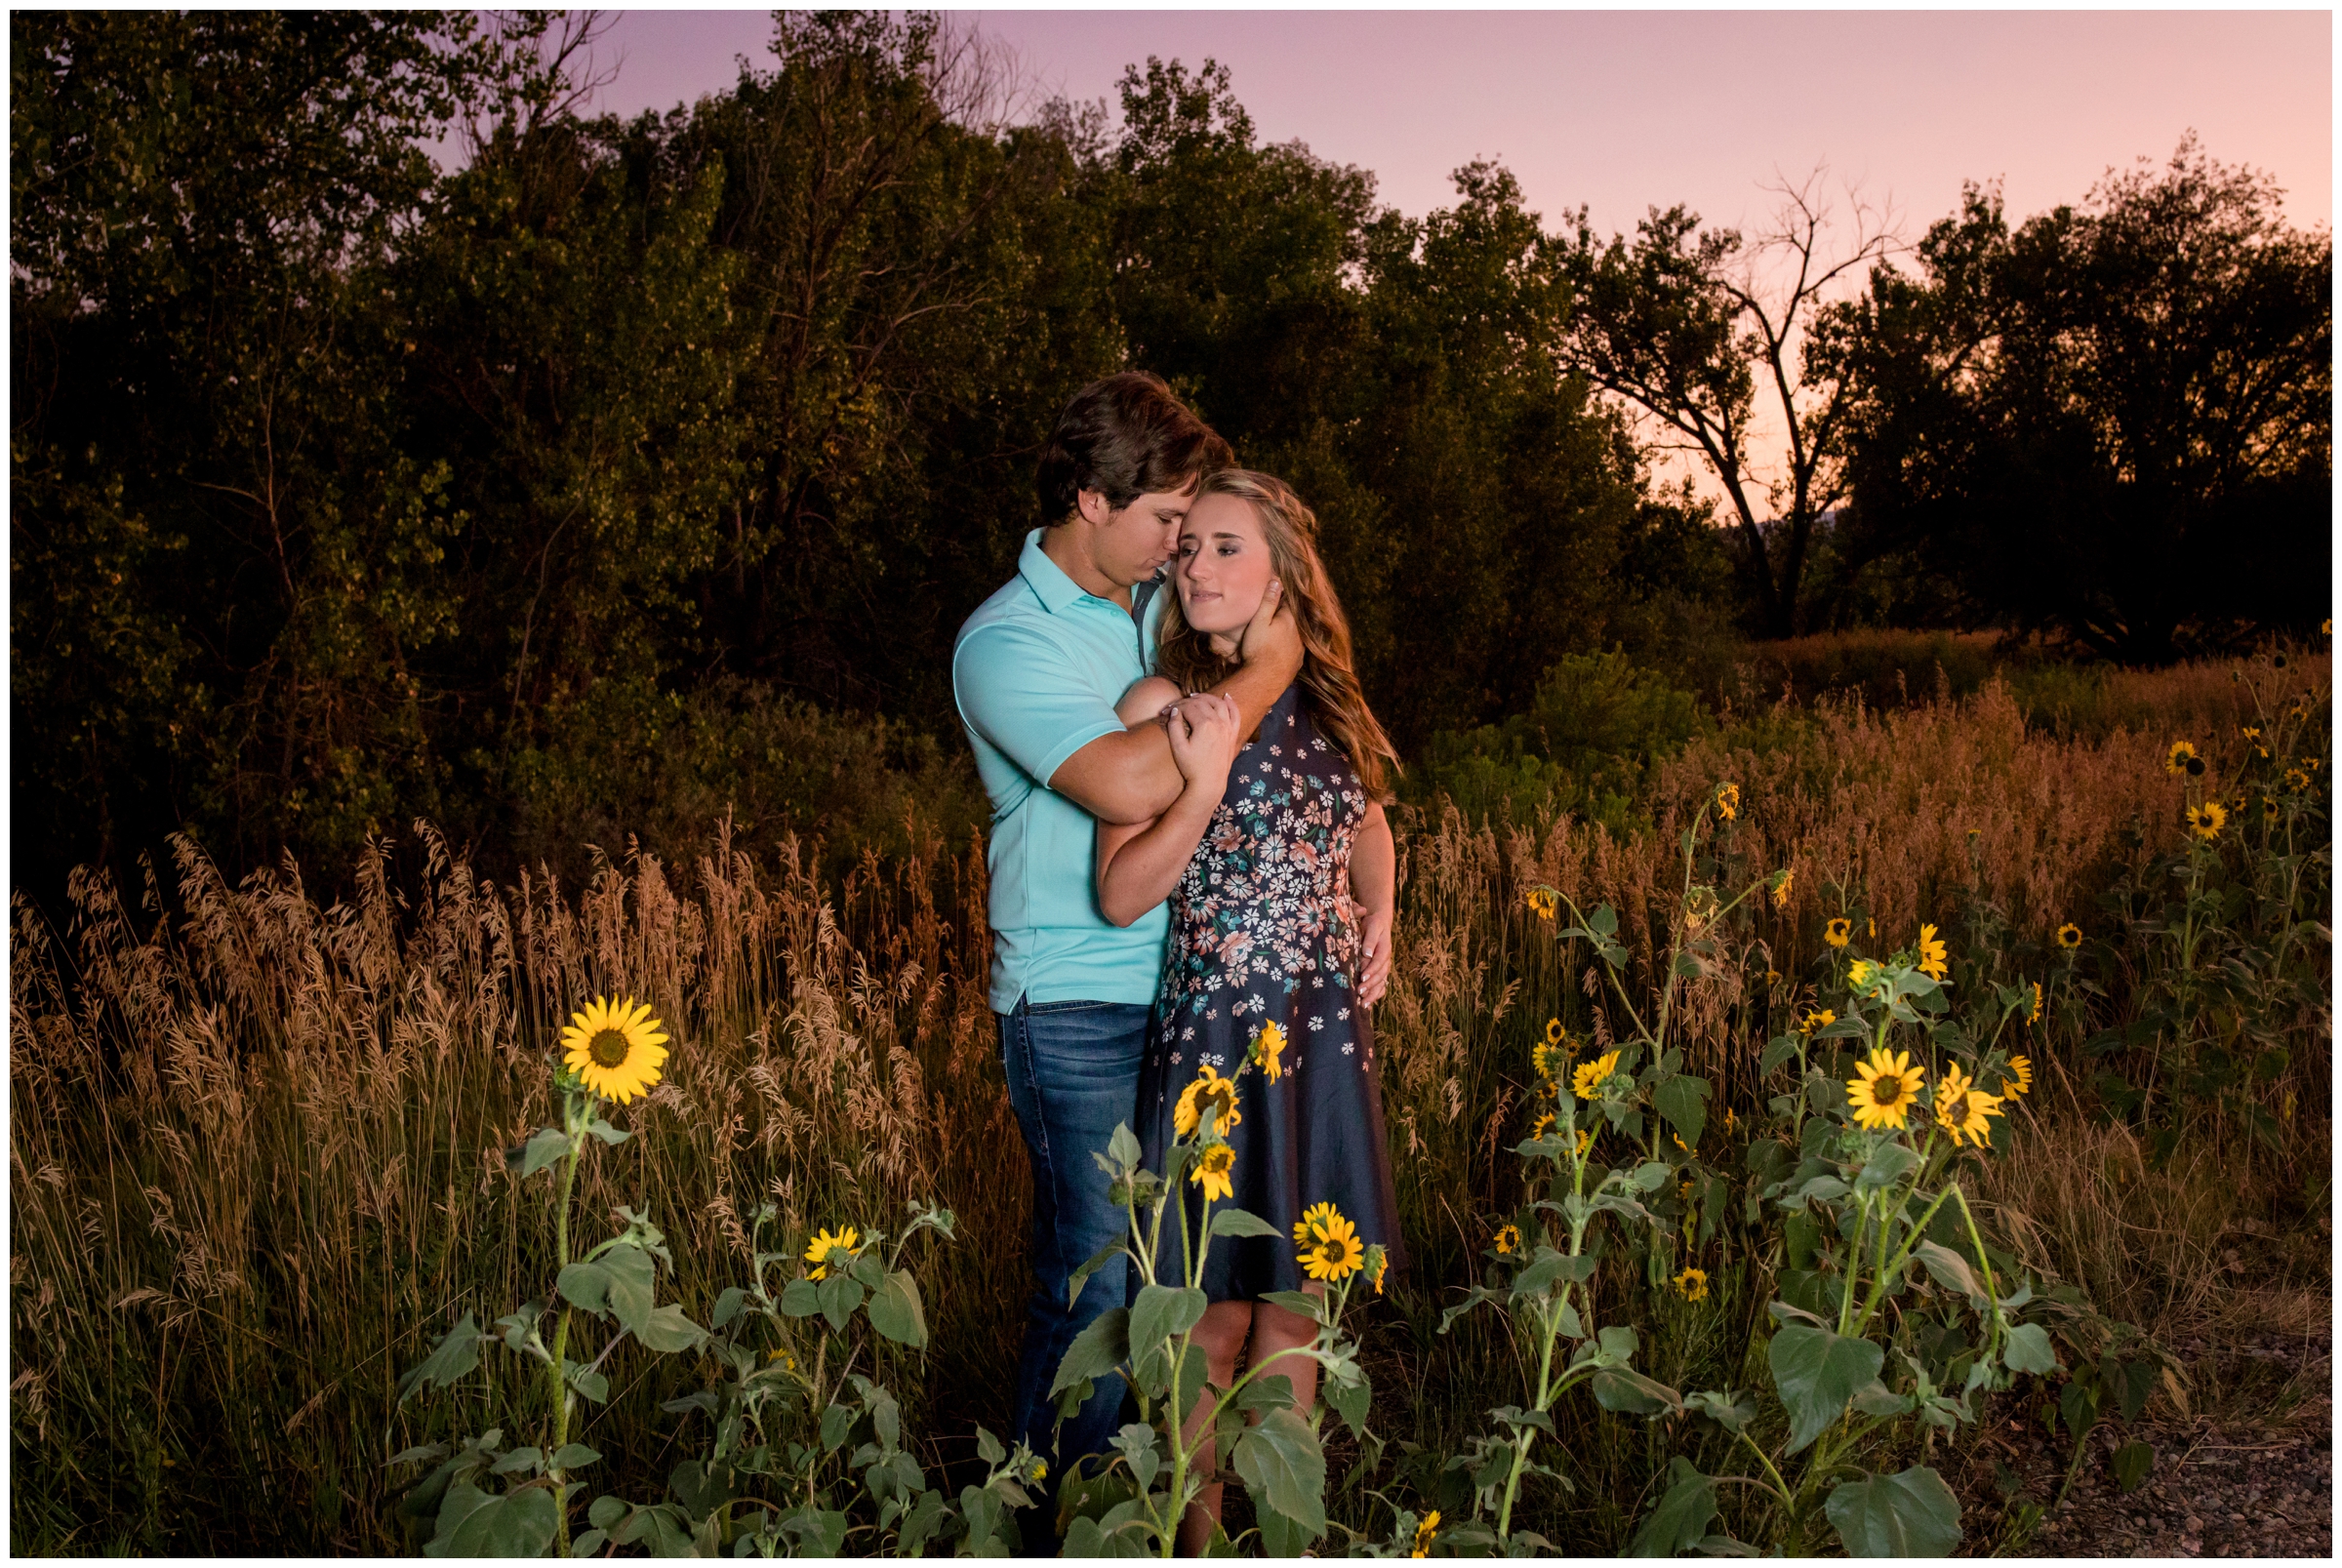 sunset engagement photography inspiration by Ft. Collins Colorado photographer Plum Pretty Photography 